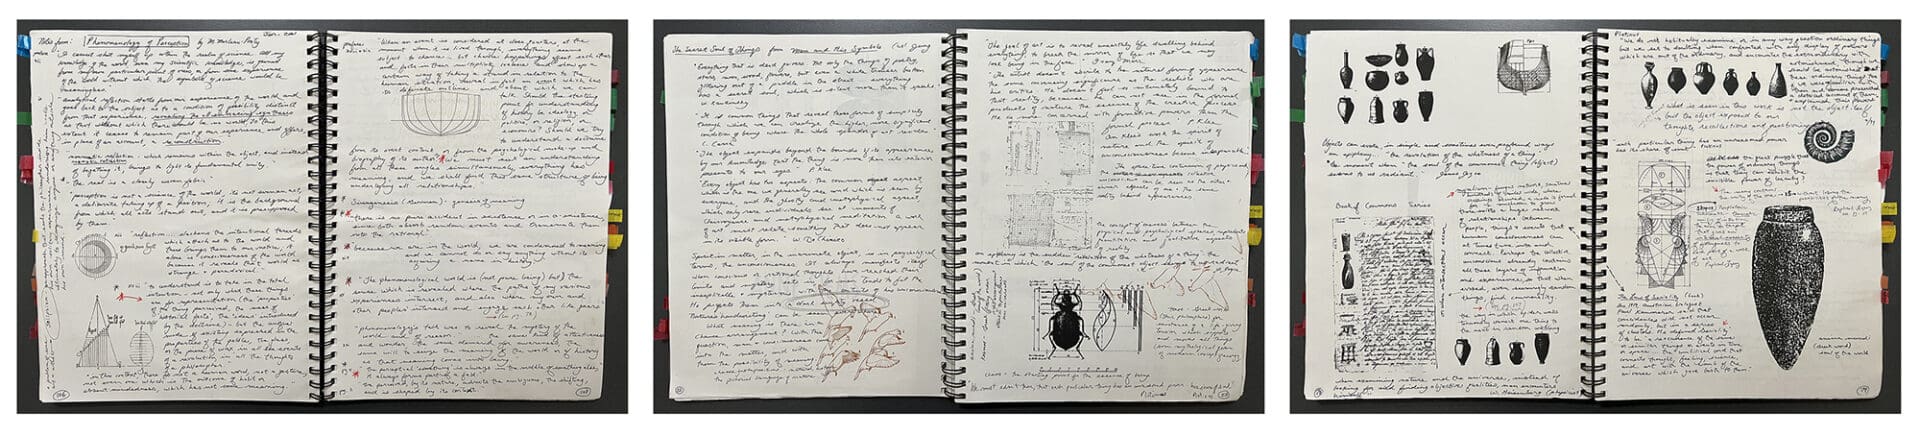 A notebook with handwritten notes and drawings of bugs.